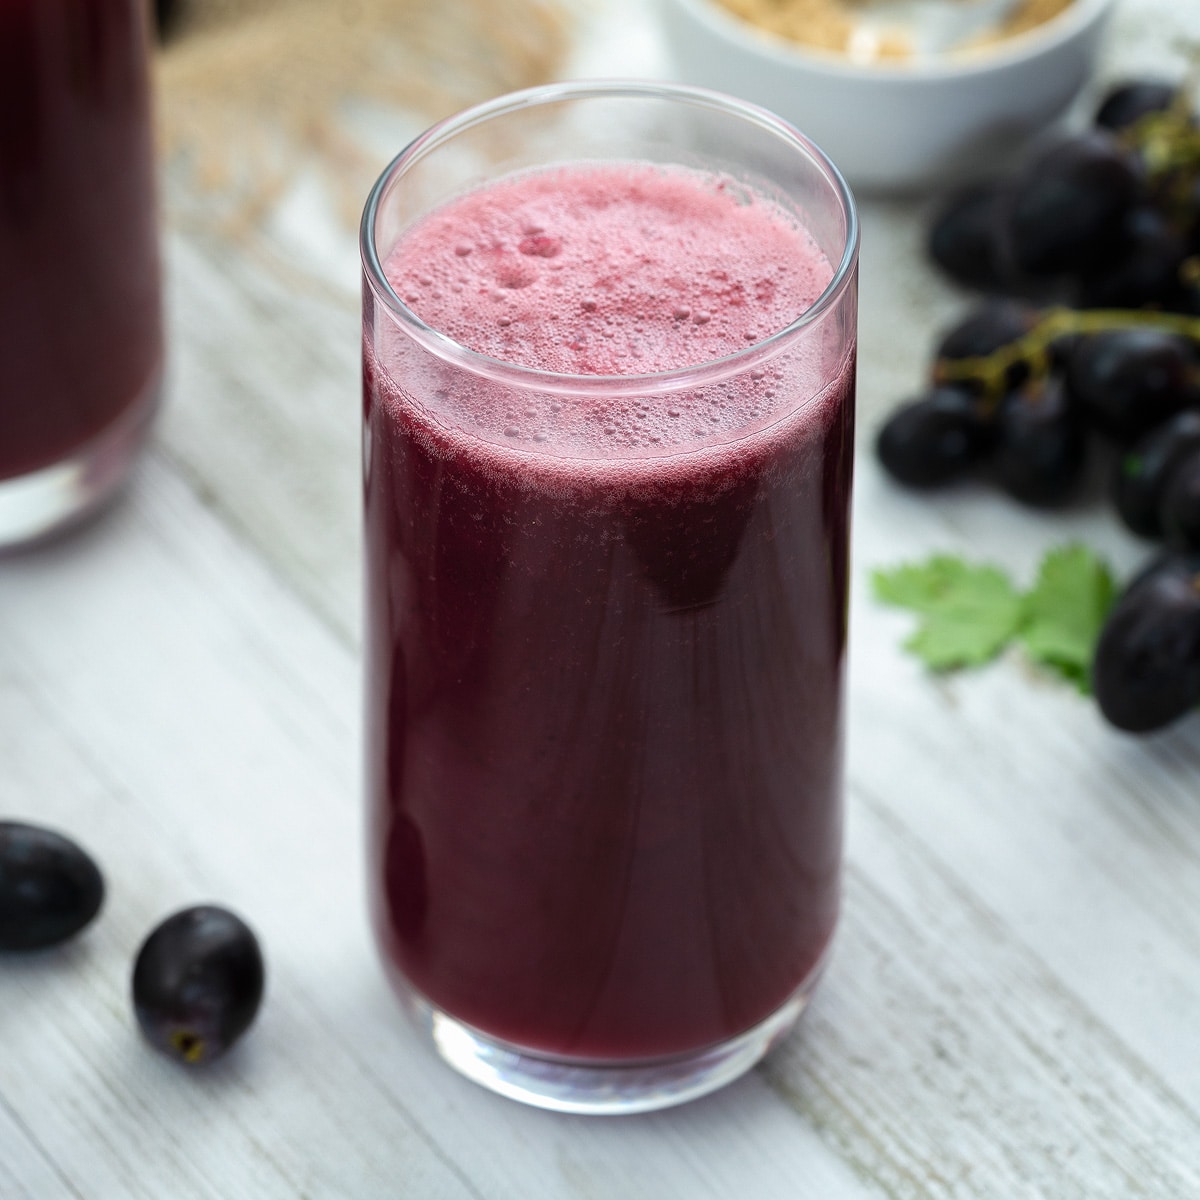 Grapes Juice Recipe and Its Benefits - Yellow Chili's